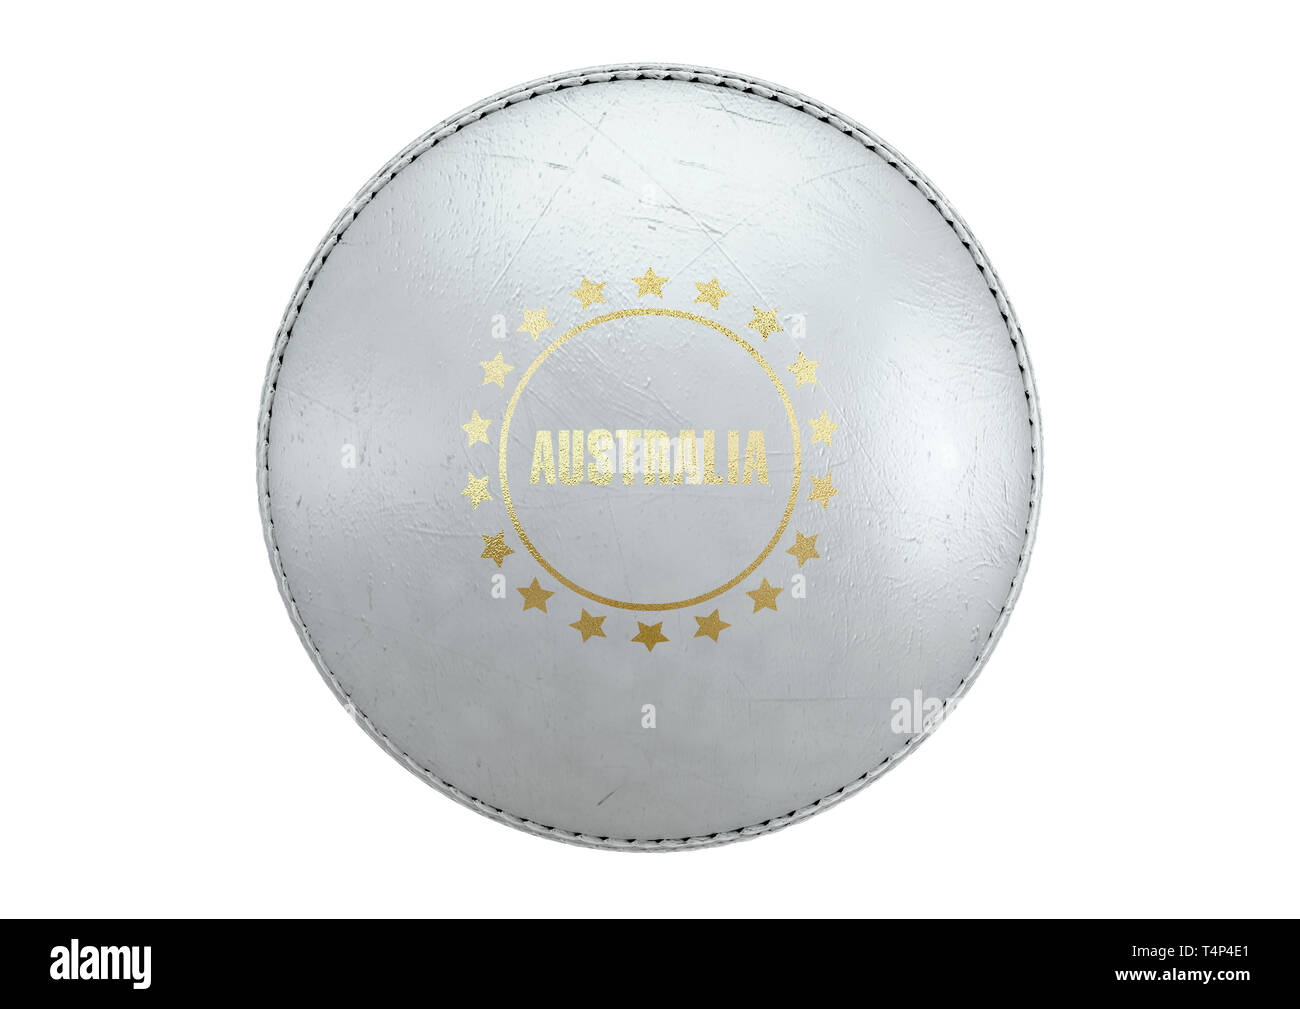 A side view of a white cricket ball with a gold foil branding area and the country name of australia on an isolated background - 3D render Stock Photo